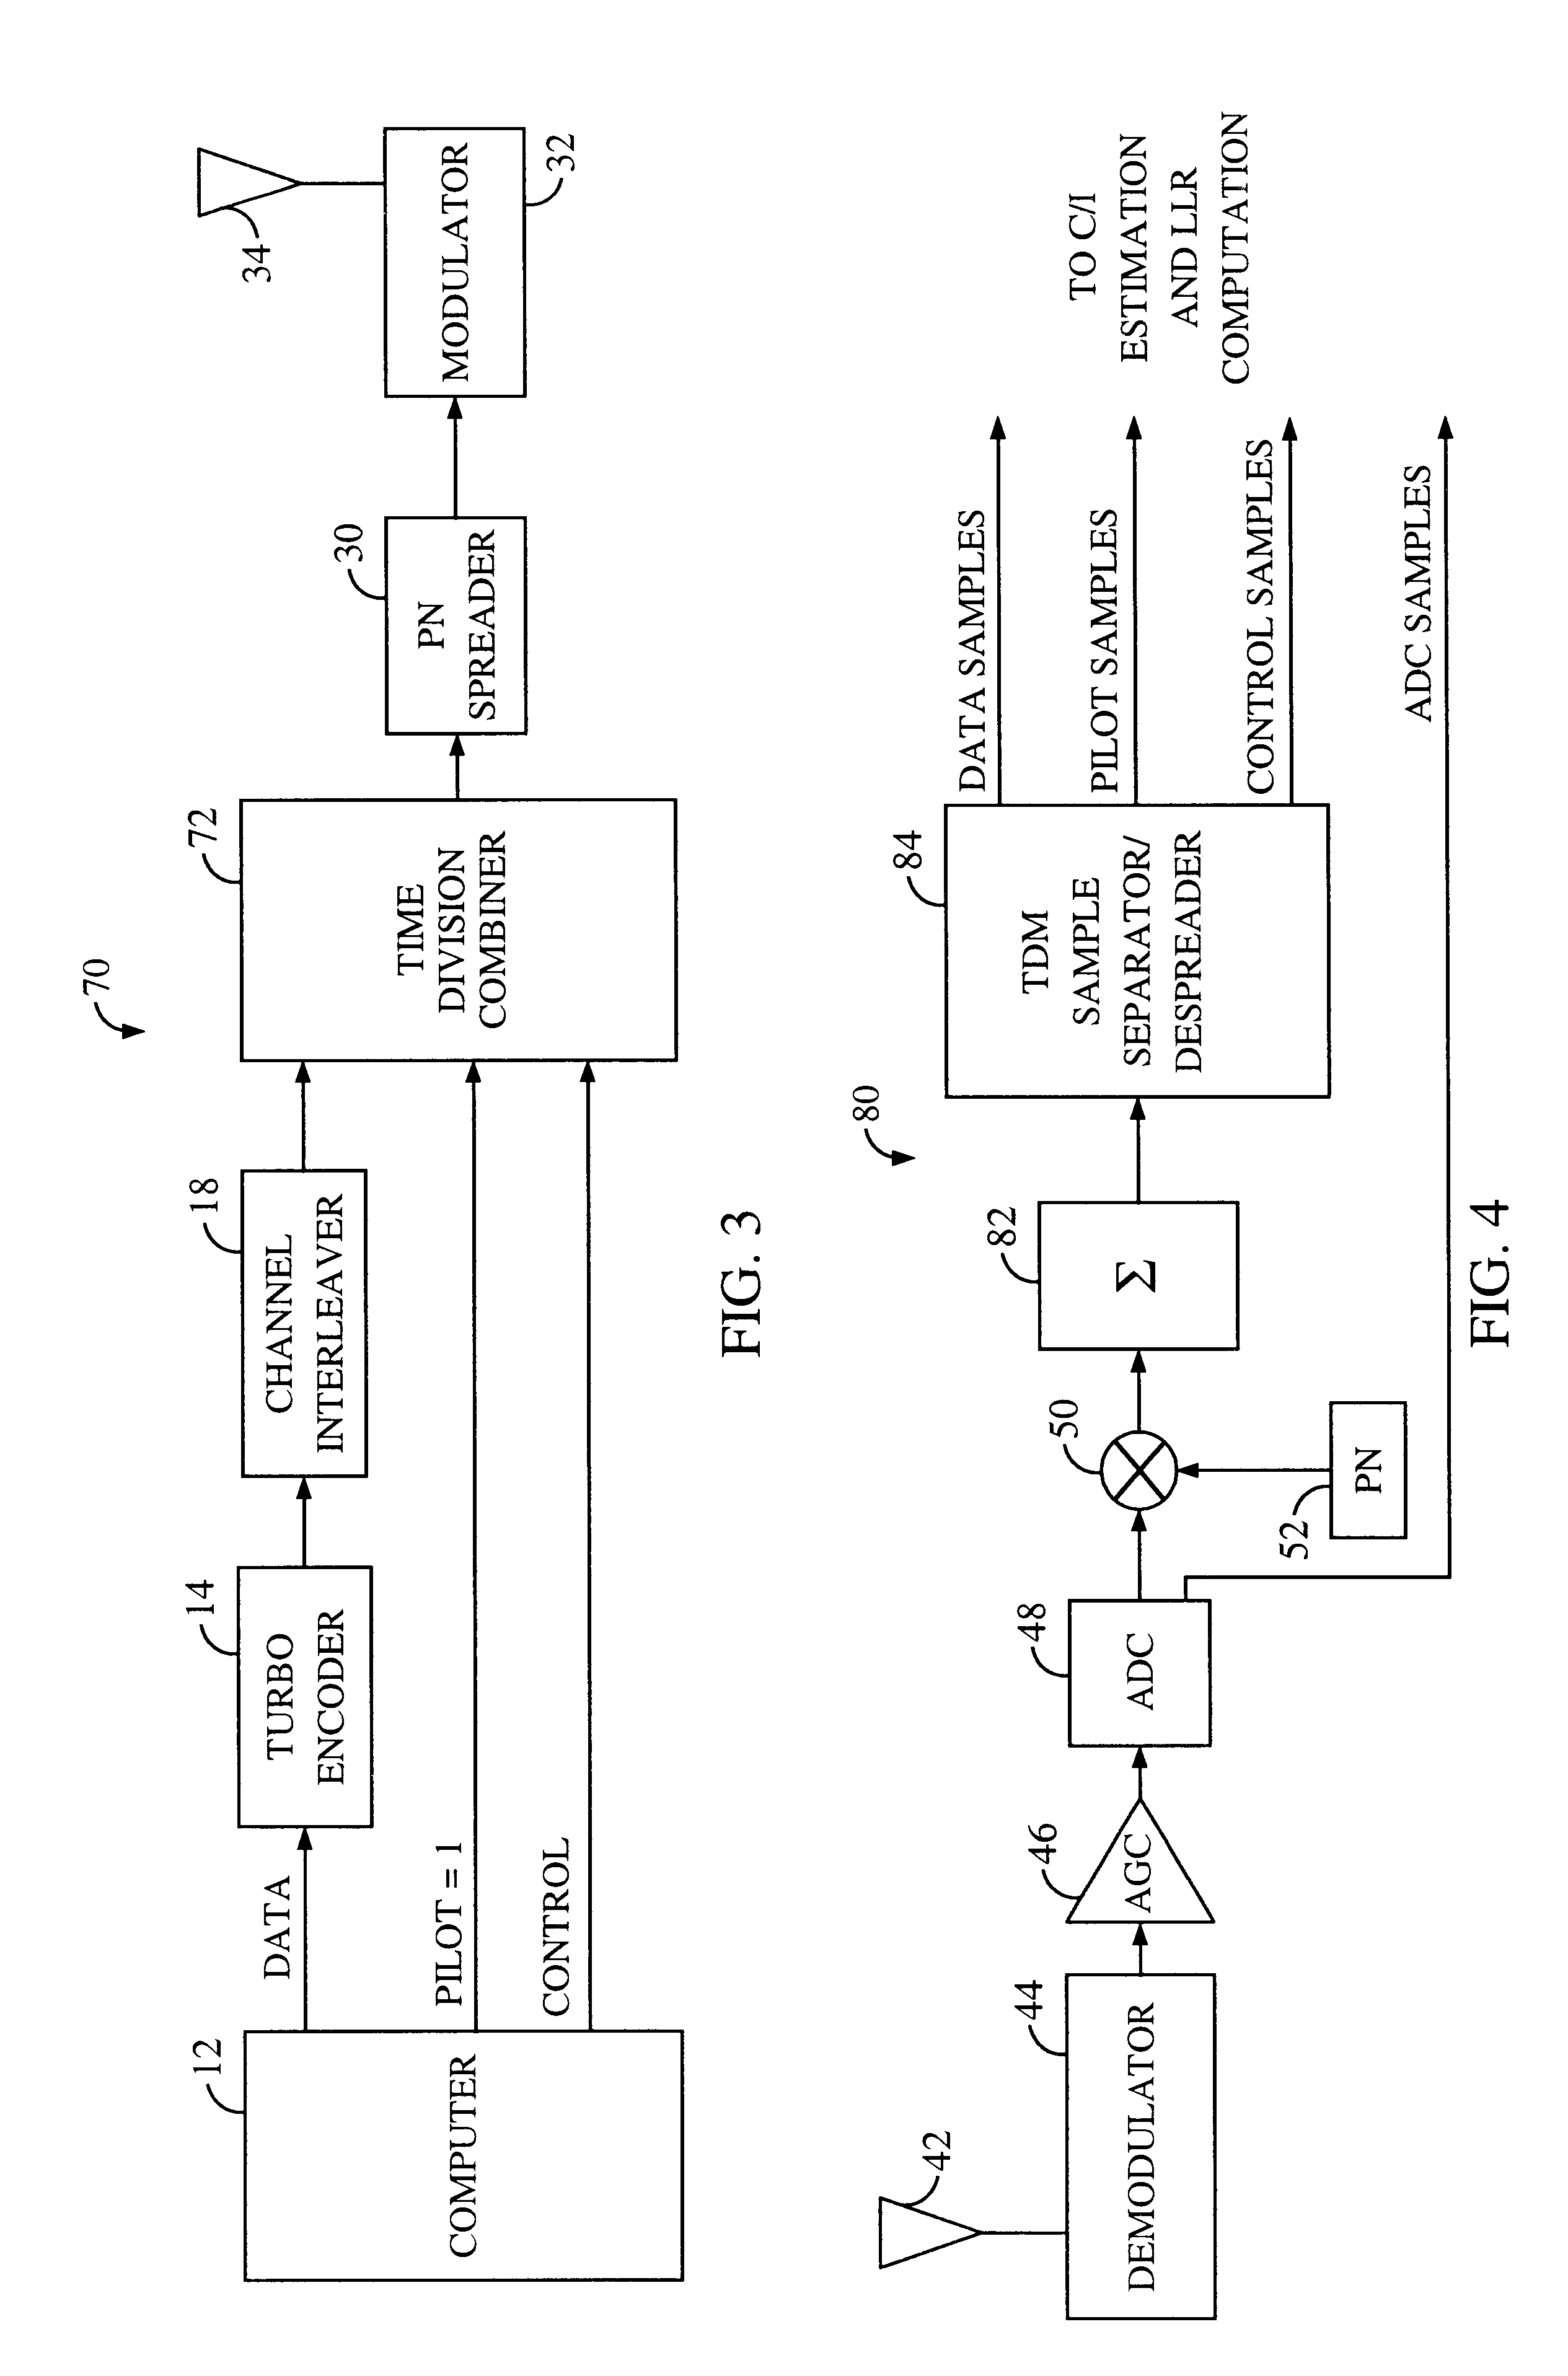 System and method for performing accurate demodulation of turbo-encoded signals via pilot assisted coherent demodulation